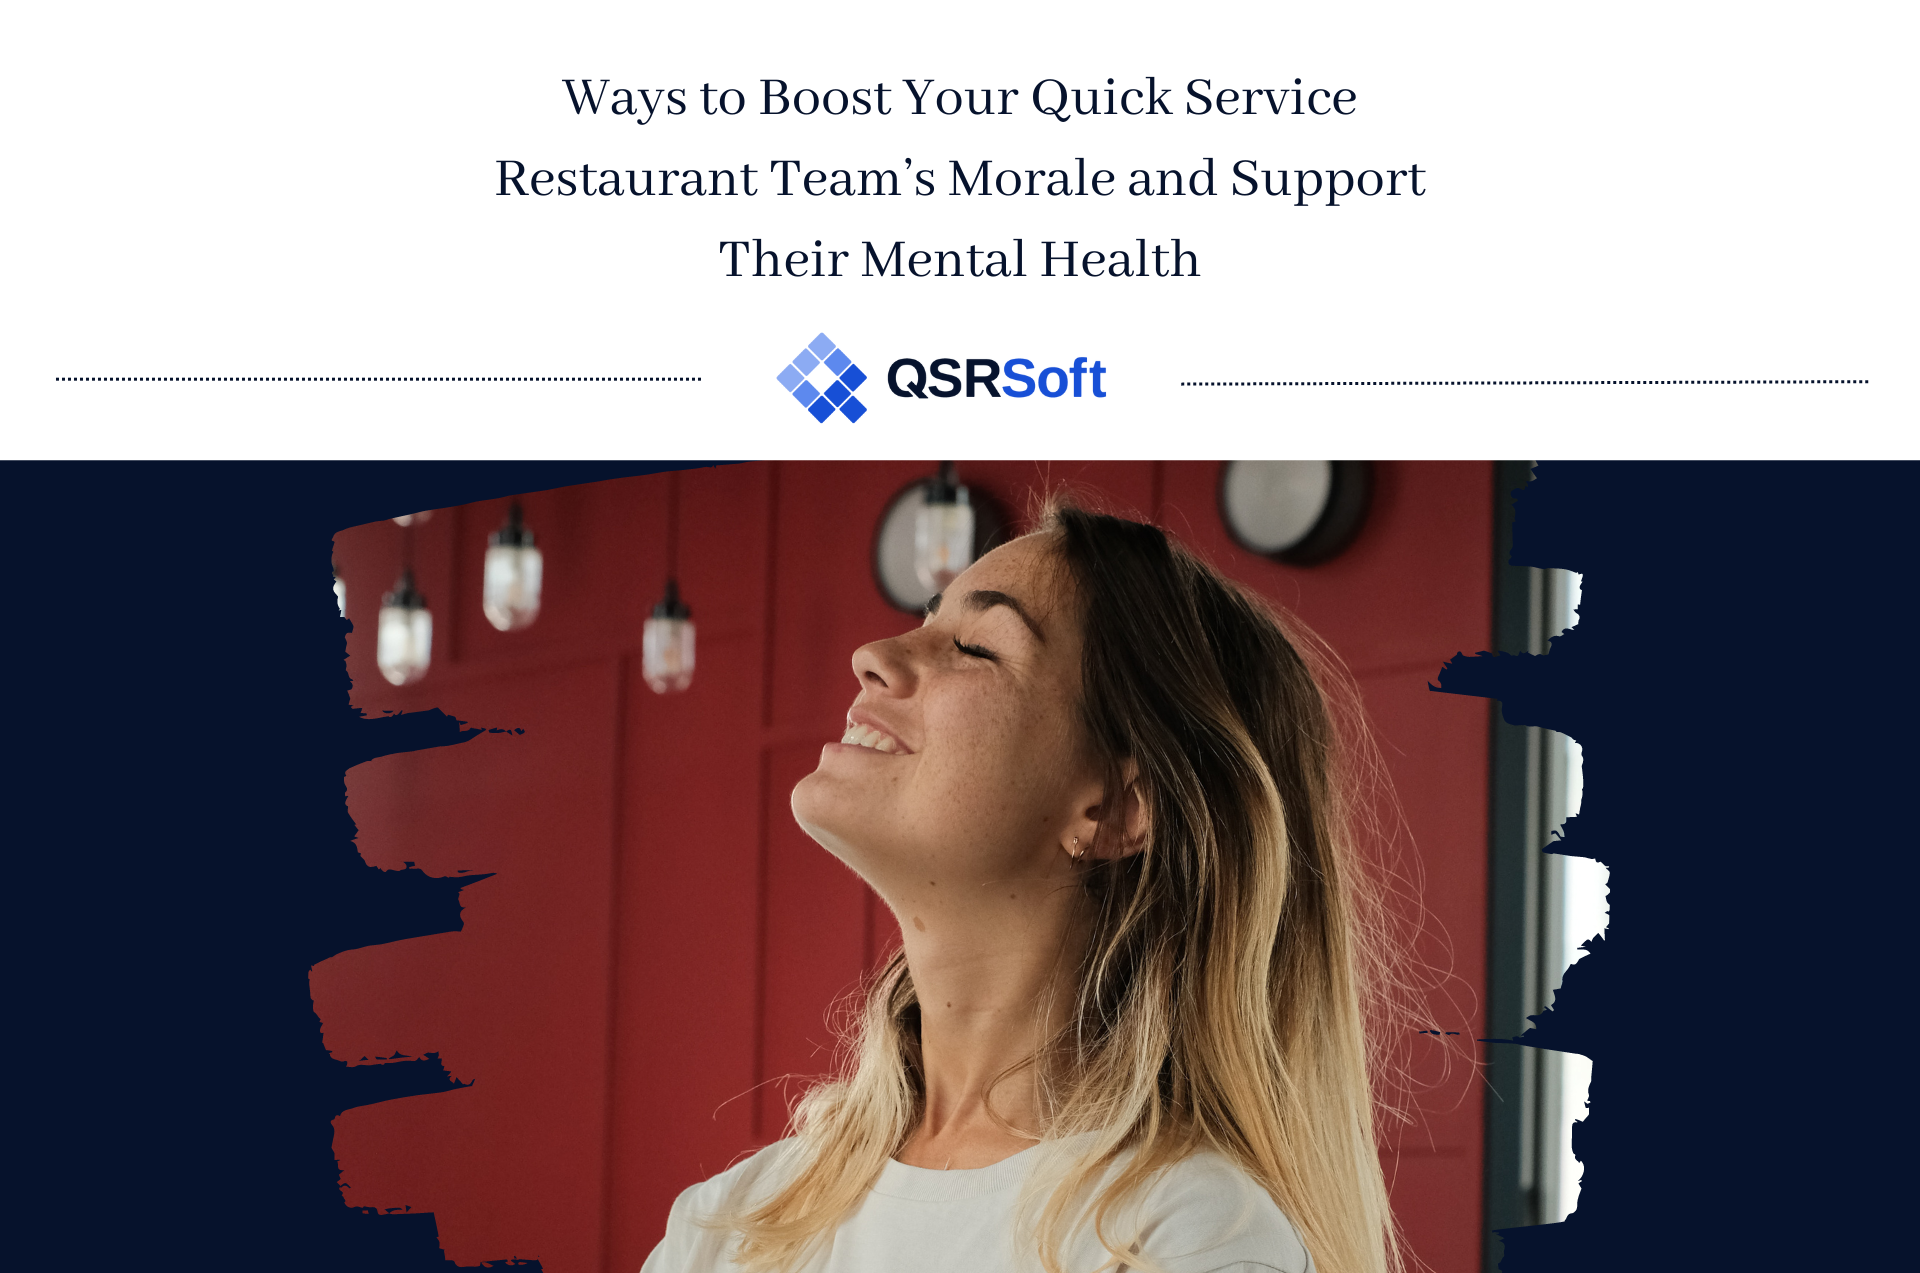 Ways to Boost Your Quick Service Restaurant Team’s Morale and Support Their Mental Health